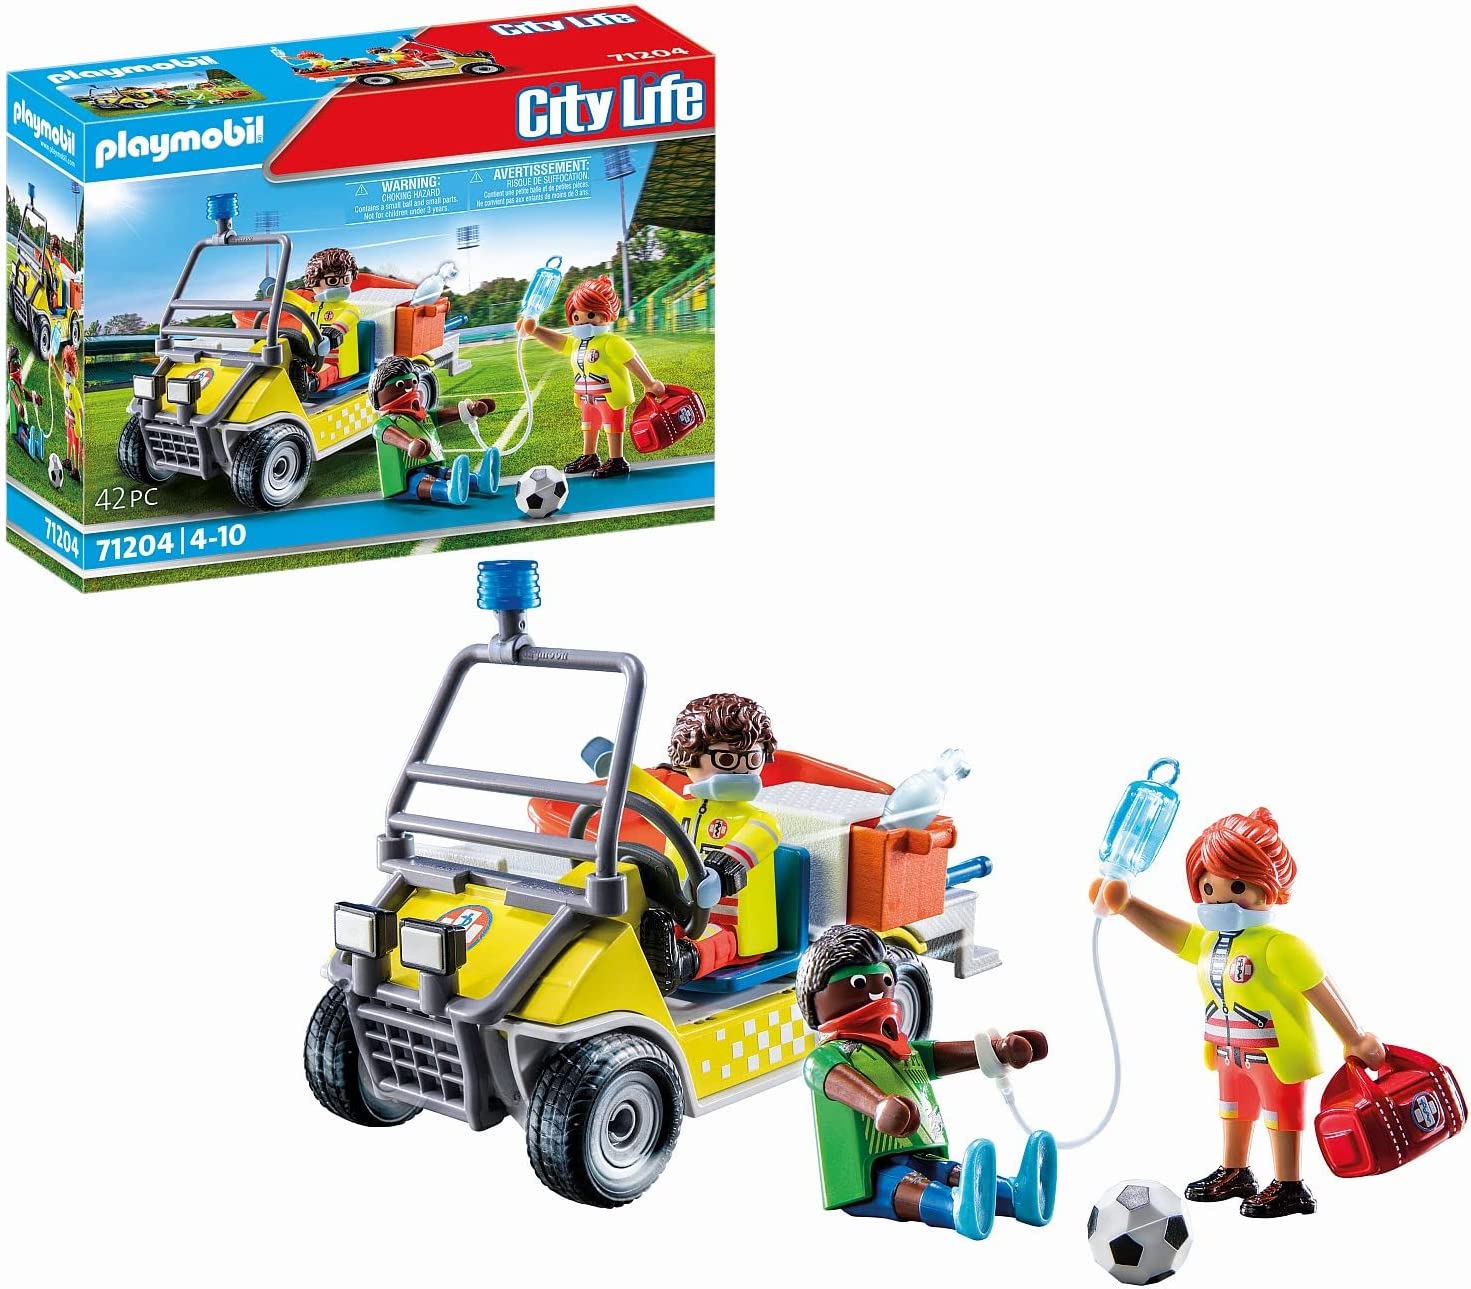 Playmobil City Life 71204 Rescue Caddy, Toy for Children from 4 years